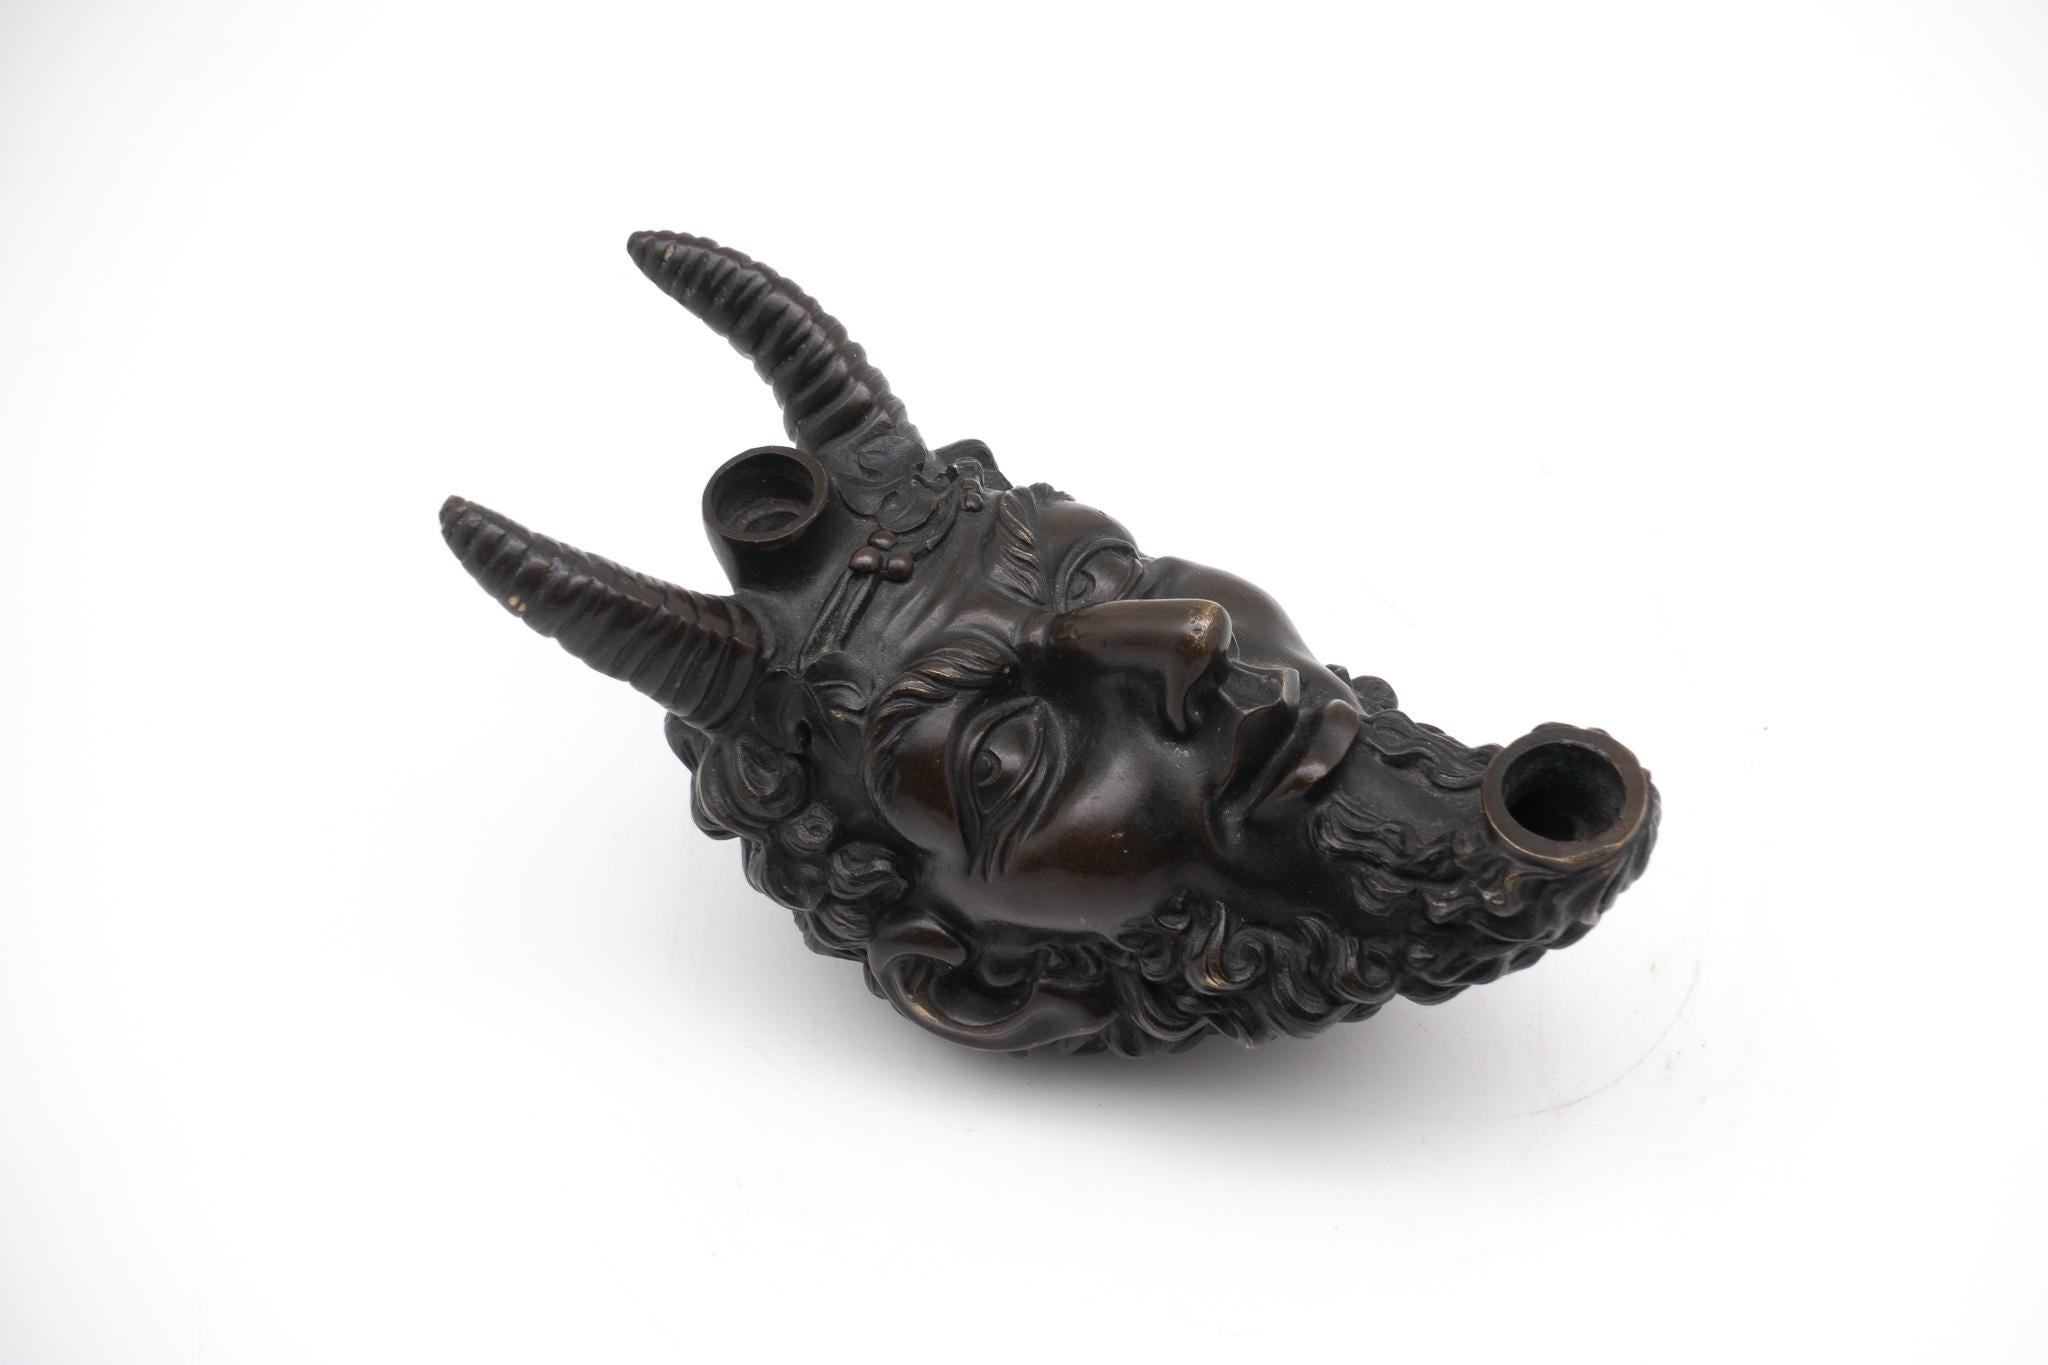 19th century continental bronze tobacco cigar lighter. There is a reservoir that can be filled with oil at the top of his head located between the horns. The tip of the beard is used for storing wick.